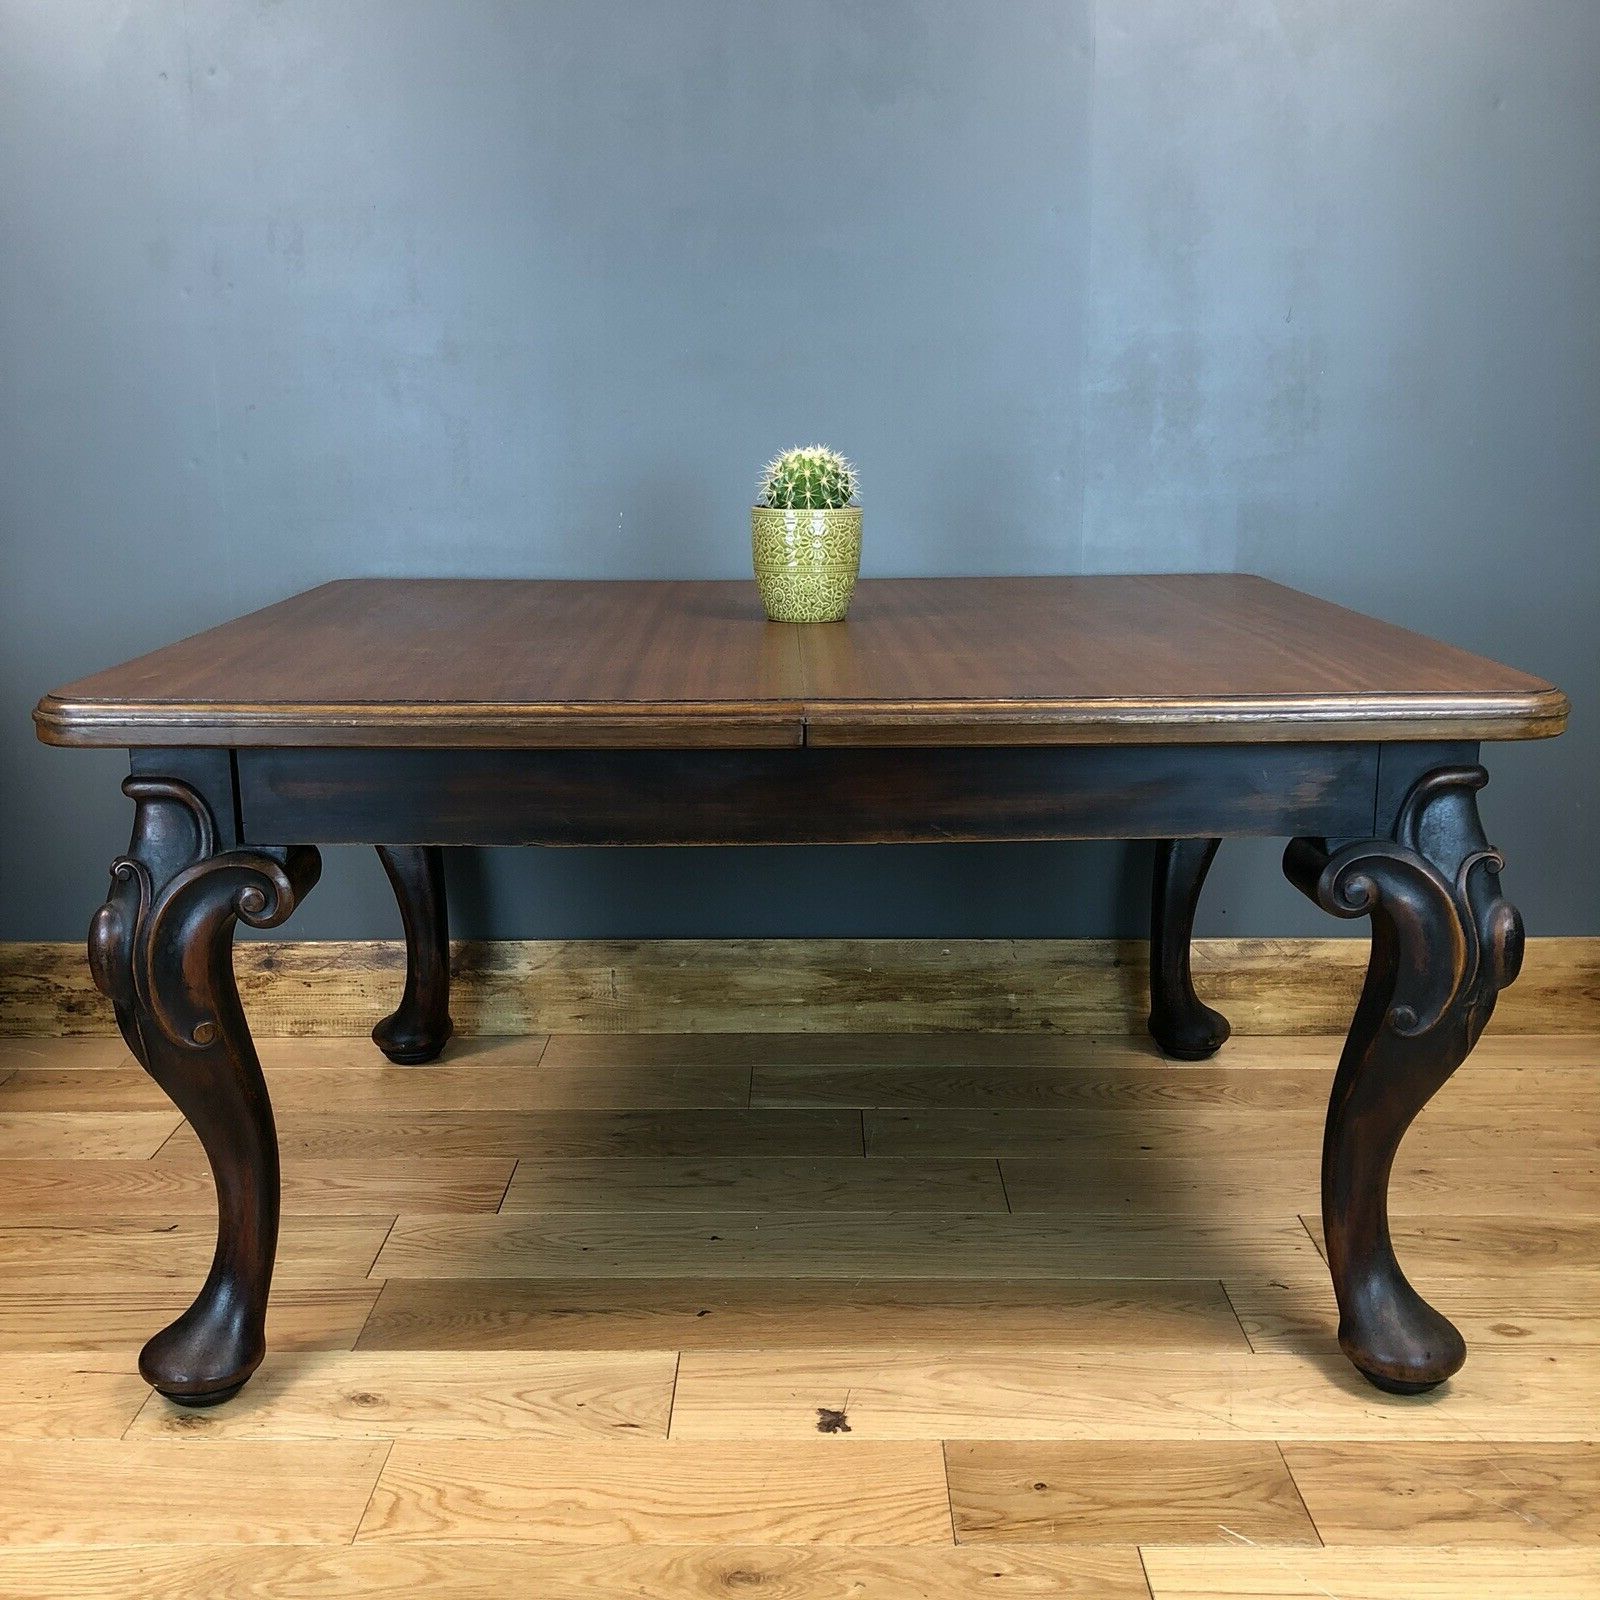 Latest Vintage Antique Mahogany Extending Dining Table Kitchen Rustic Farmhouse With Rustic Mahogany Extending Dining Tables (View 3 of 25)